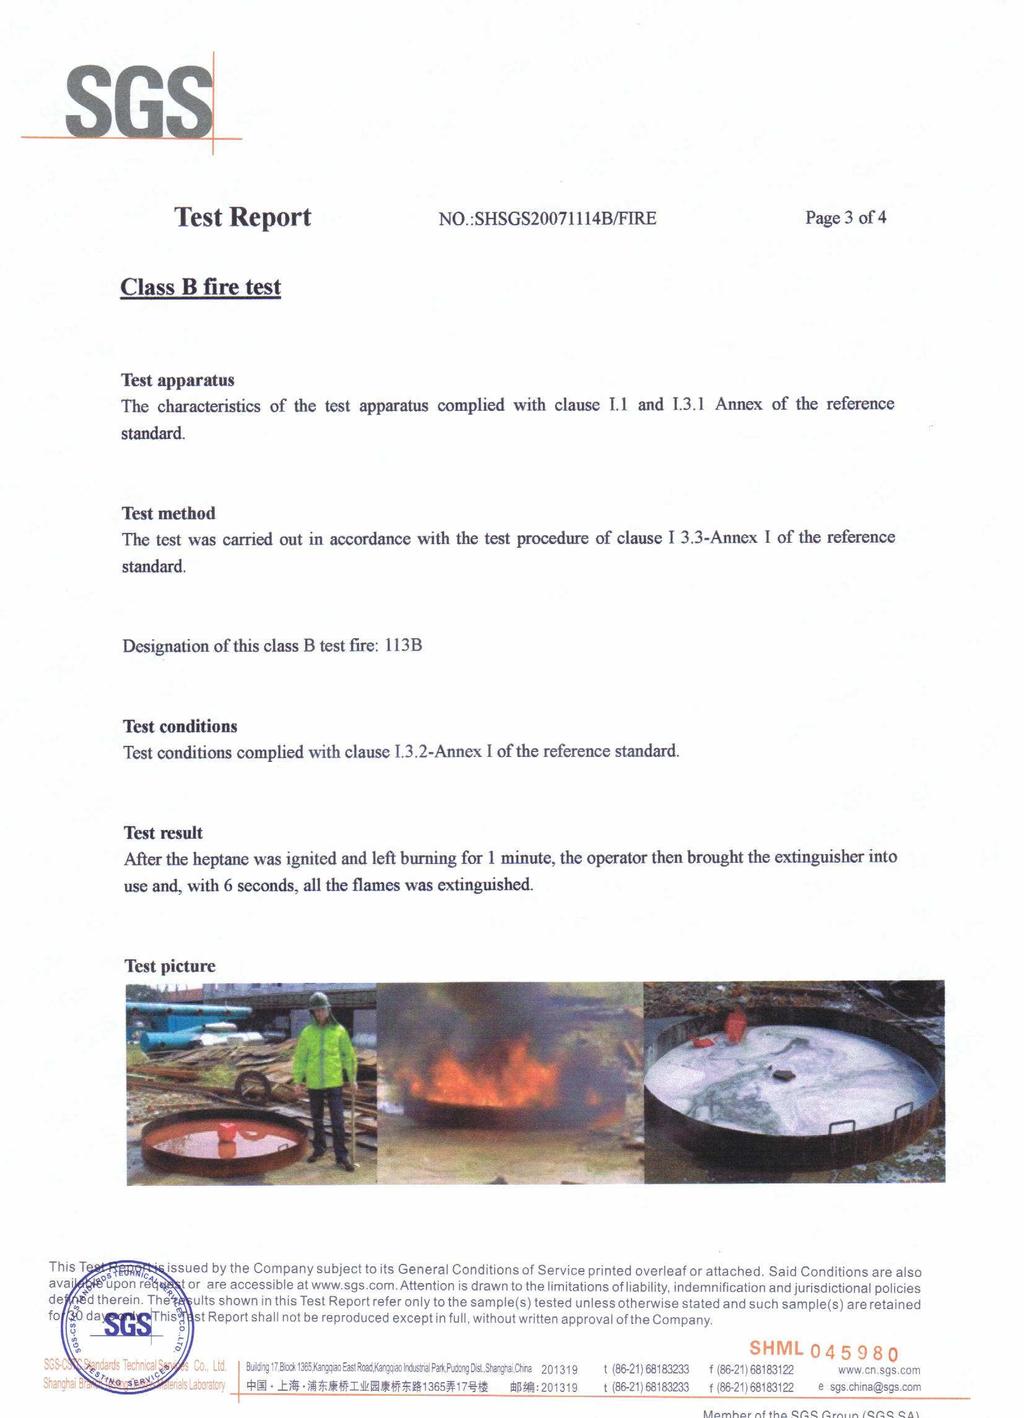 Annex A 29 of 30 4.2 Certifications relating to the FKO KOM4T 5.6 FOAM Products. (3c) Test Report.